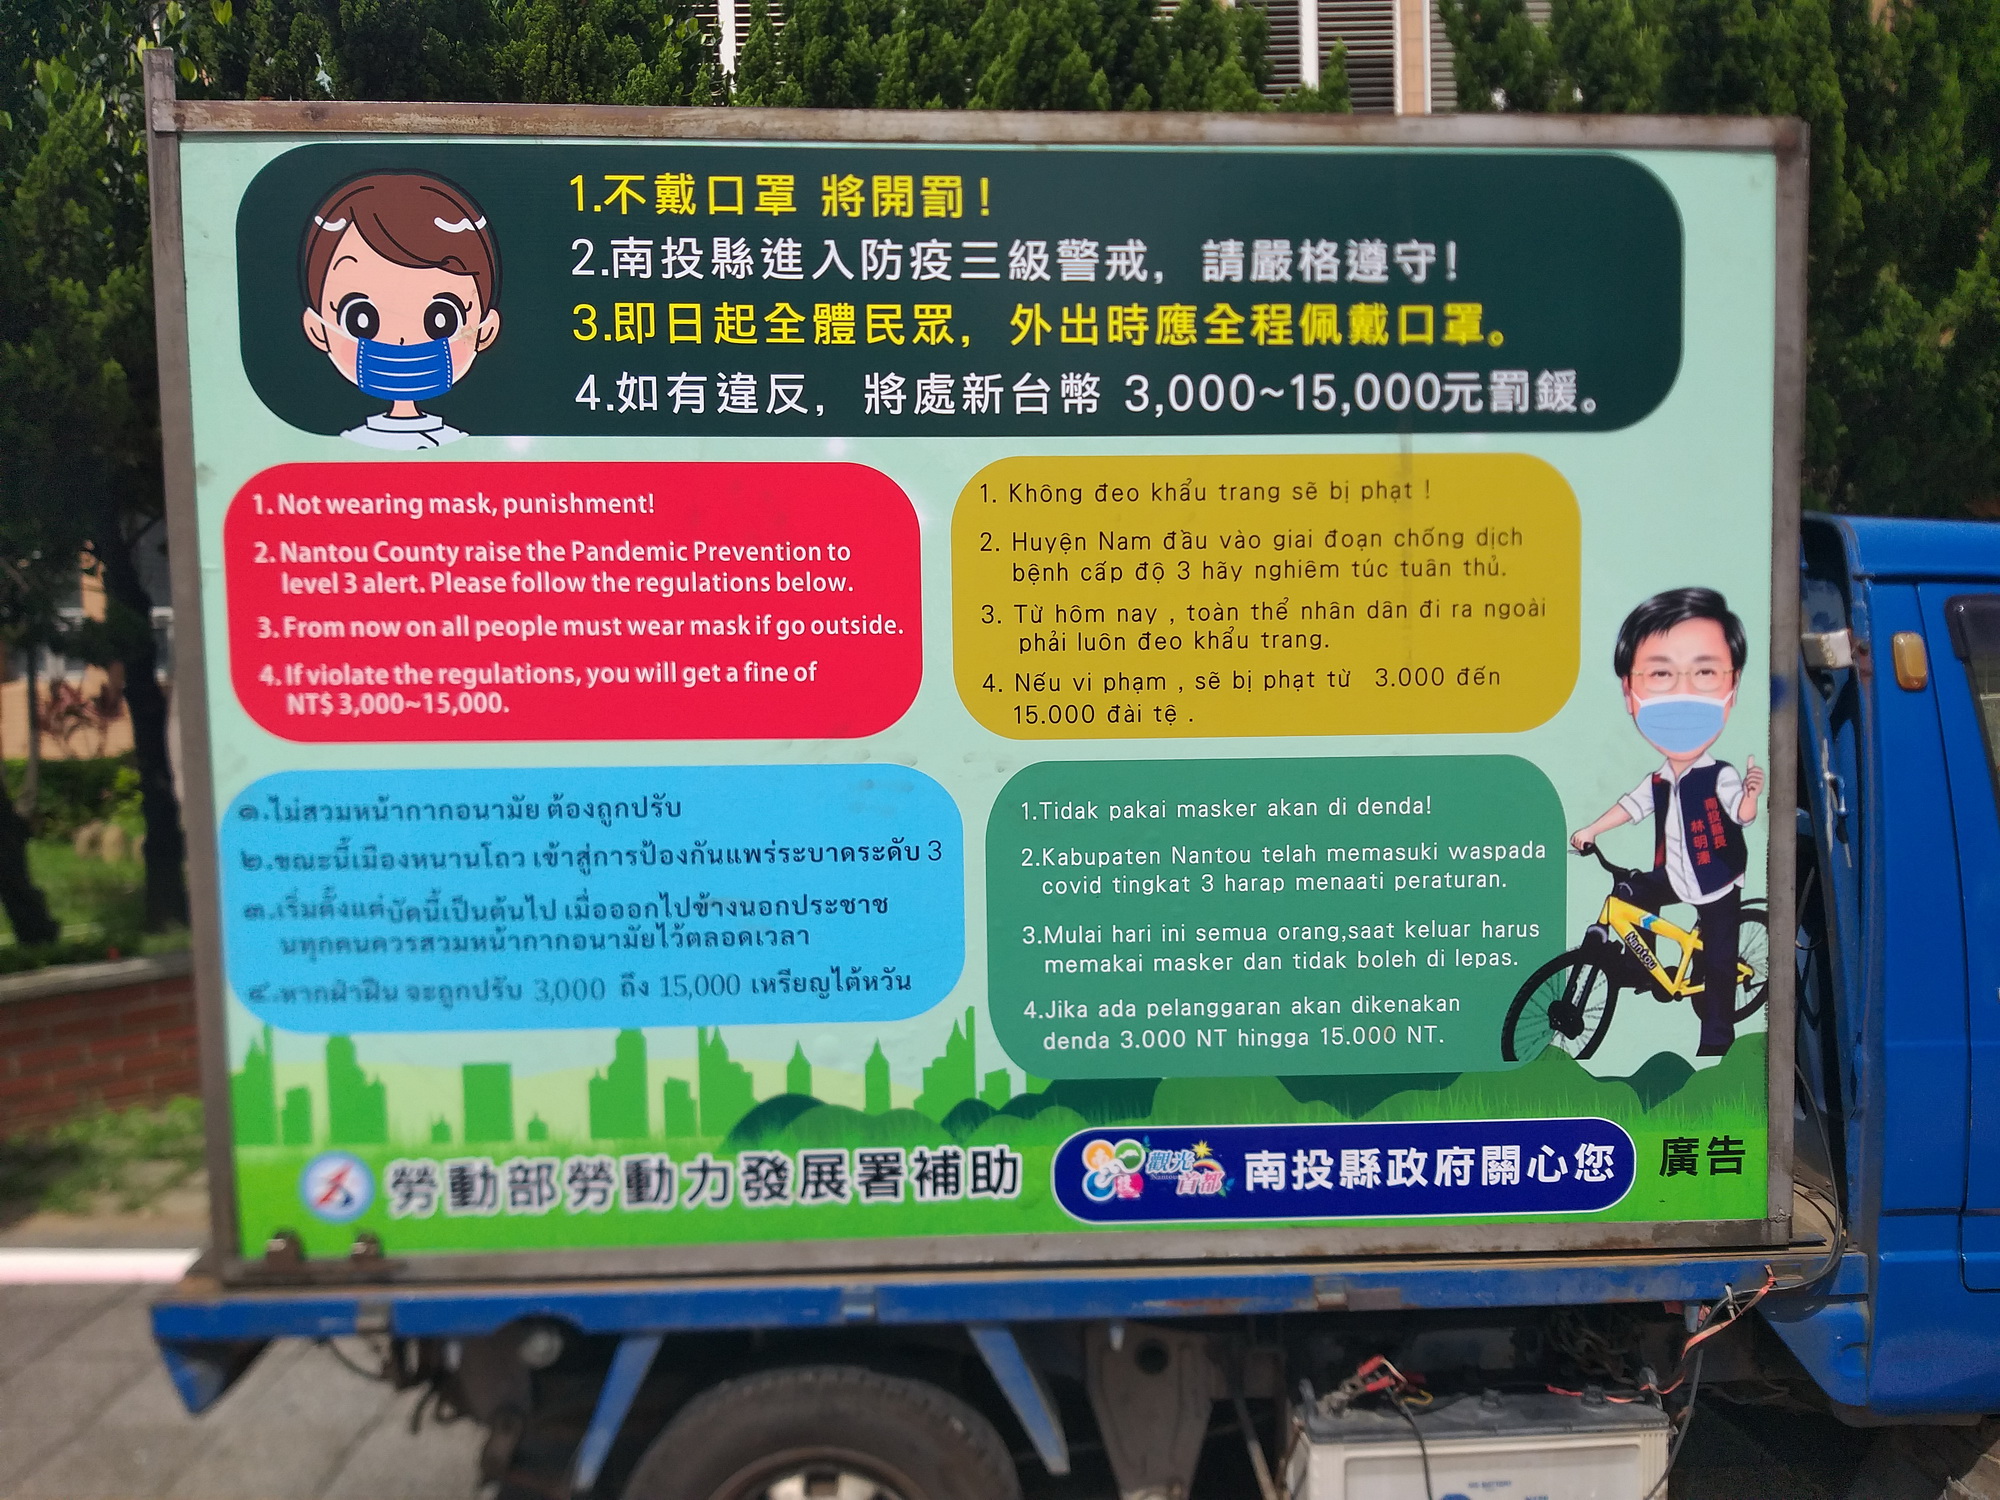 Aside from a multilingual broadcast, there are also epidemic prevention information written in Indonesian, Vietnamese and Thai  on the outside of the vehicle. (Photo/provided by Nantou County Government)